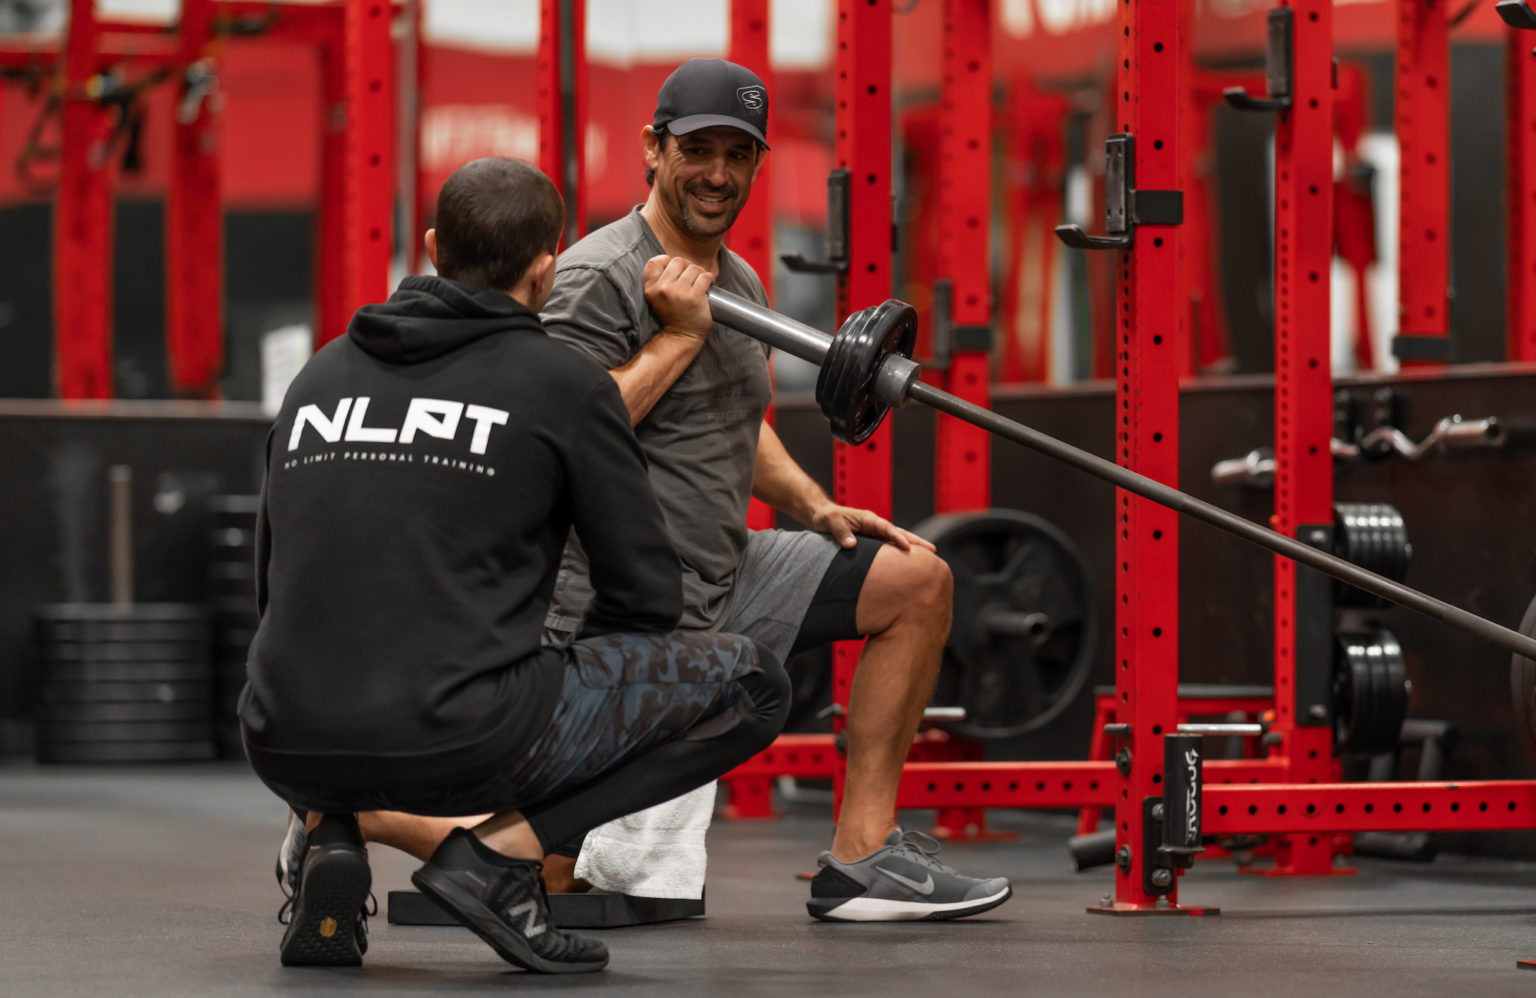 No Limit Personal Training